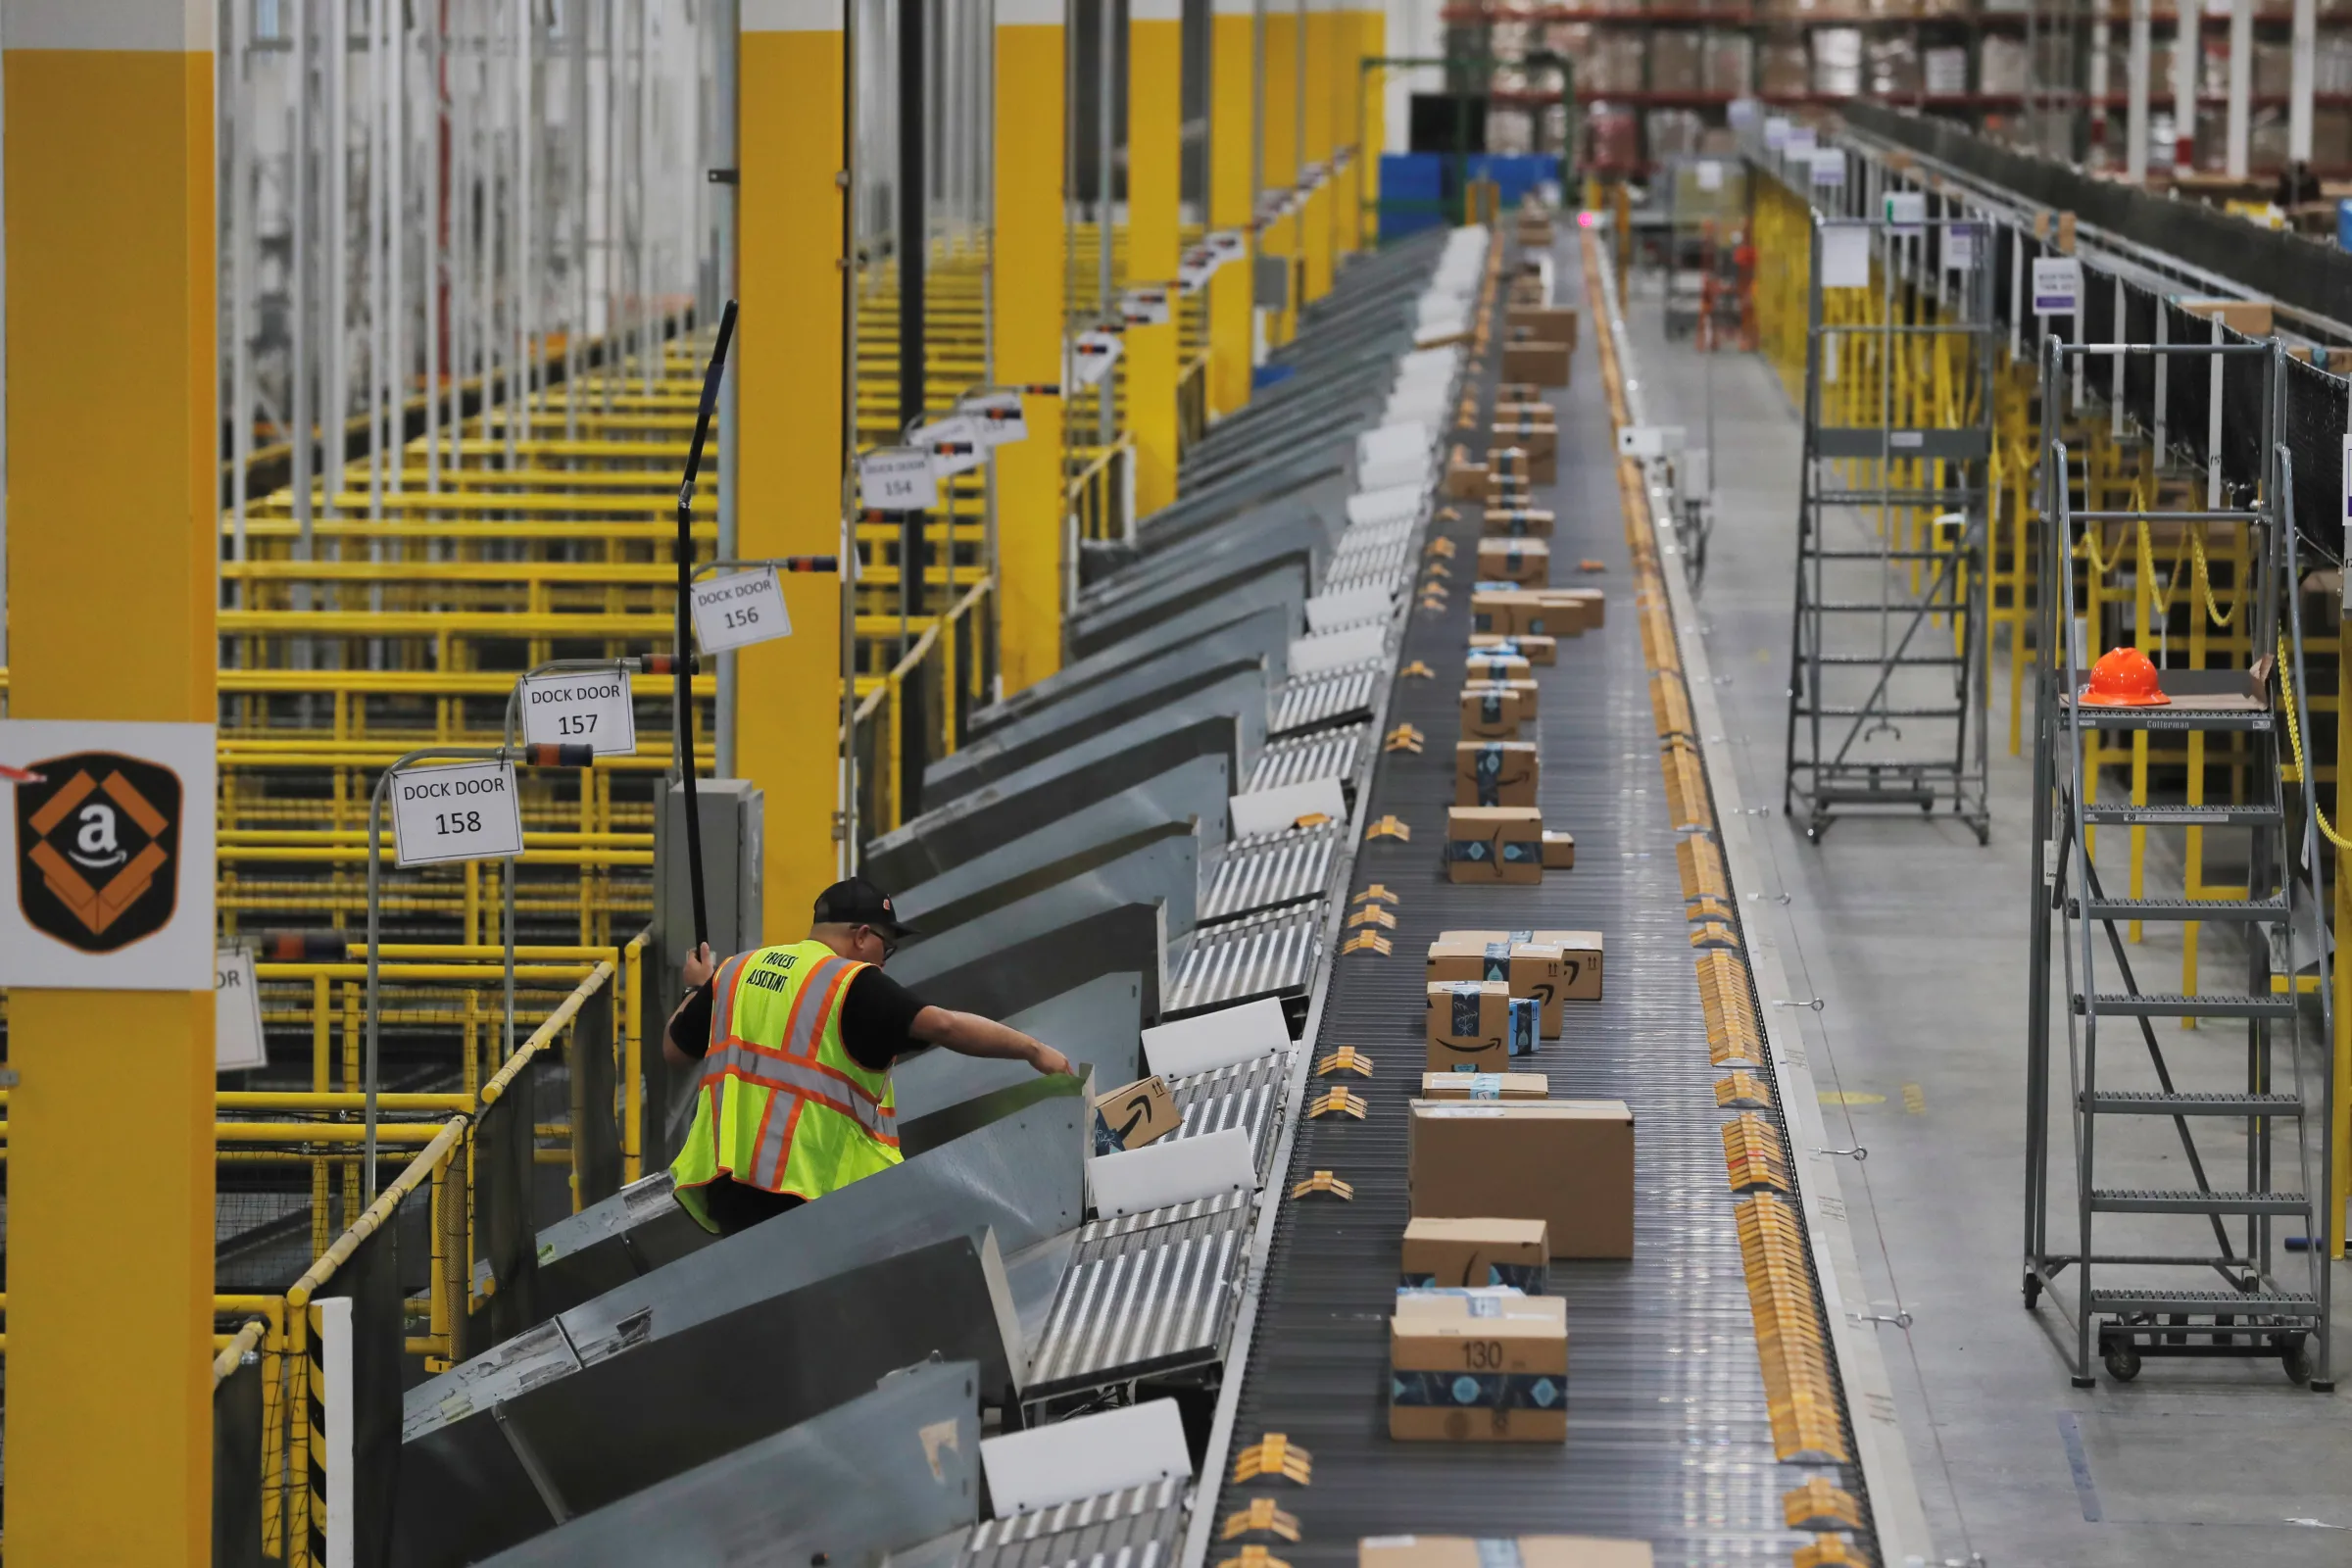 Amazon packages are pushed onto ramps leading to delivery trucks by a robotic system as they travel on conveyor belts inside of an Amazon fulfillment center on Cyber Monday in Robbinsville, New Jersey, U.S., December 2, 2019. REUTERS/Lucas Jackson